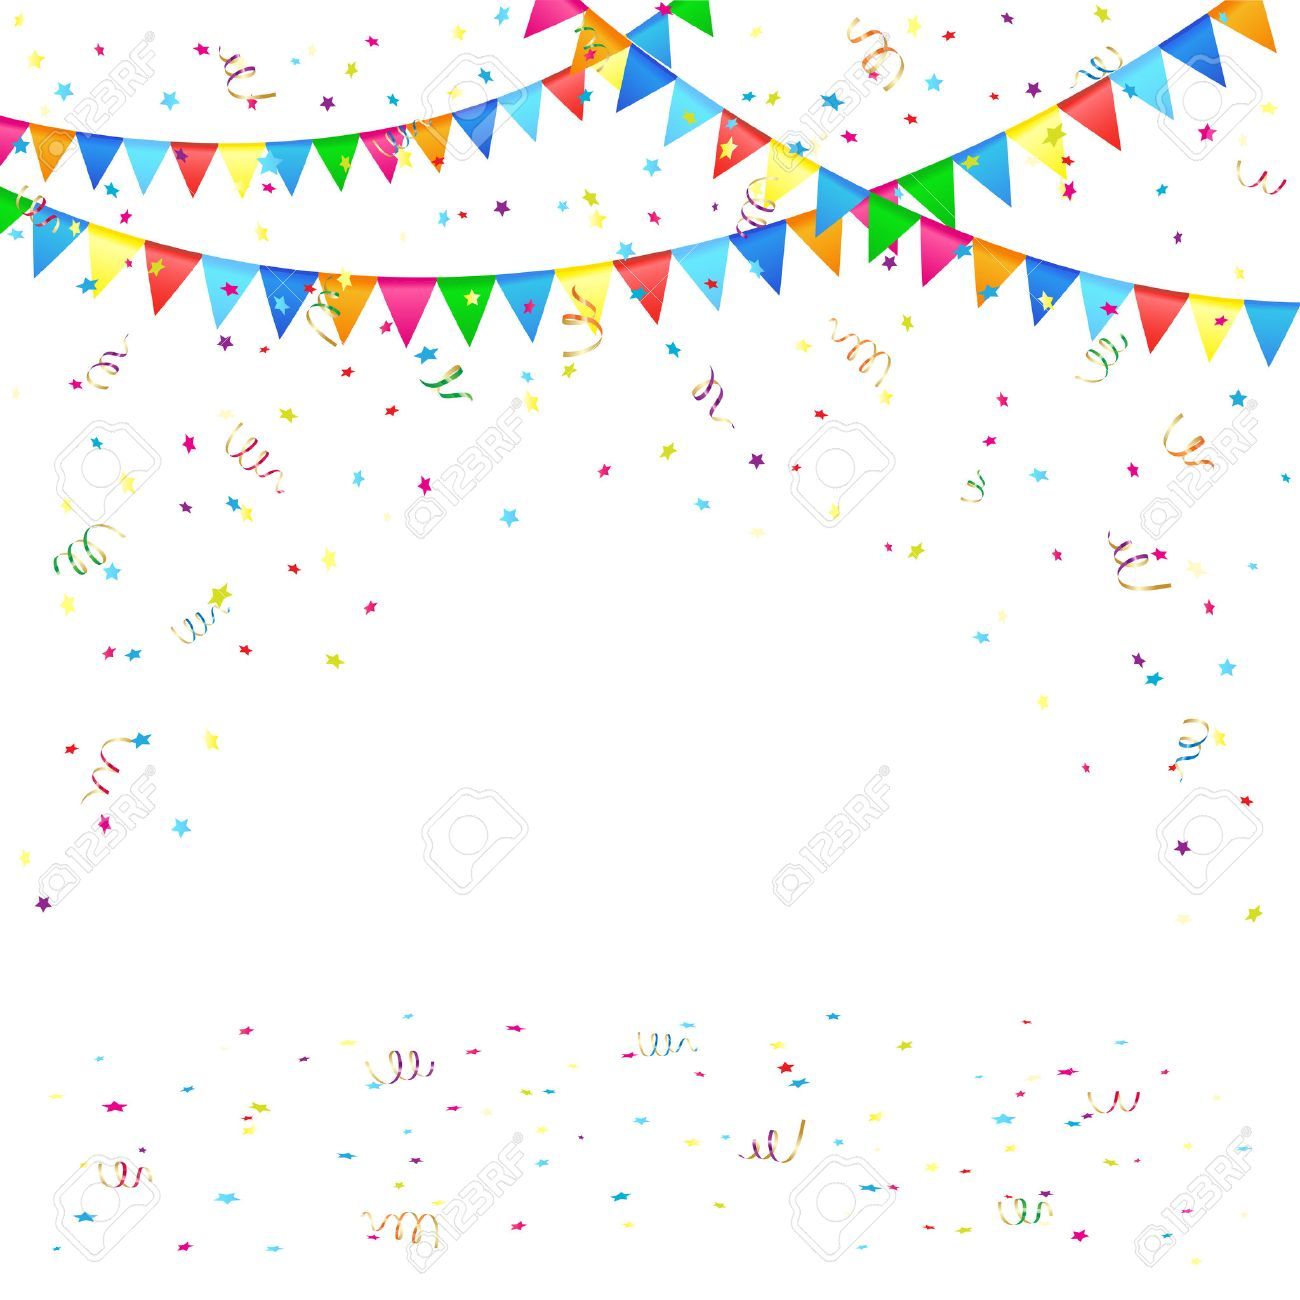 Festive Background With Colored Pennants And Confetti